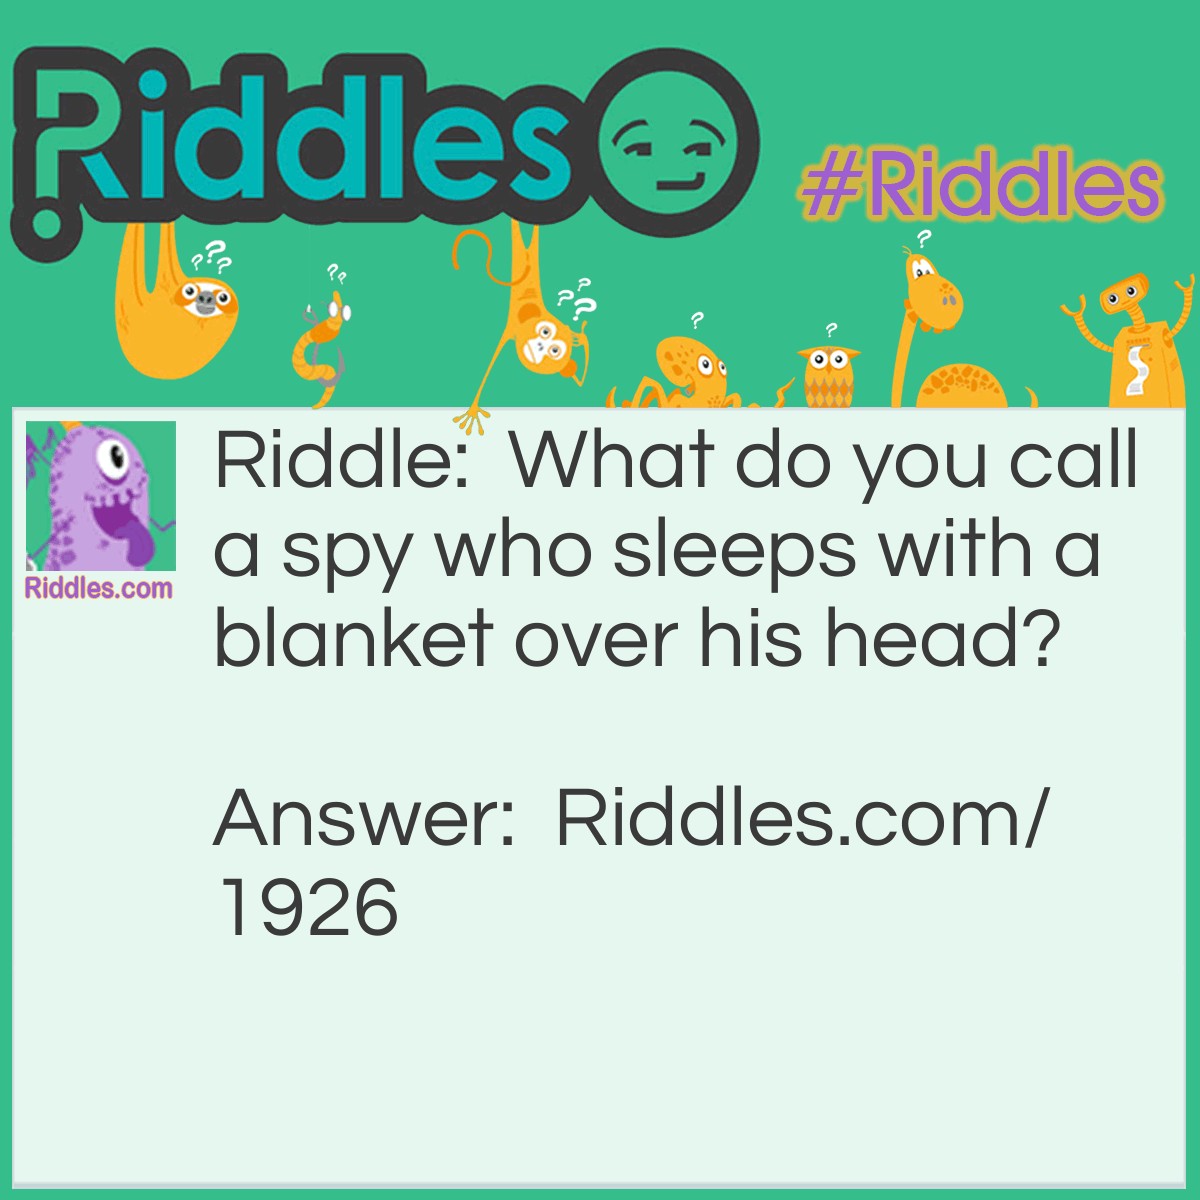 Riddle: What do you call a spy who sleeps with a blanket over his head? Answer: An undercover agent.